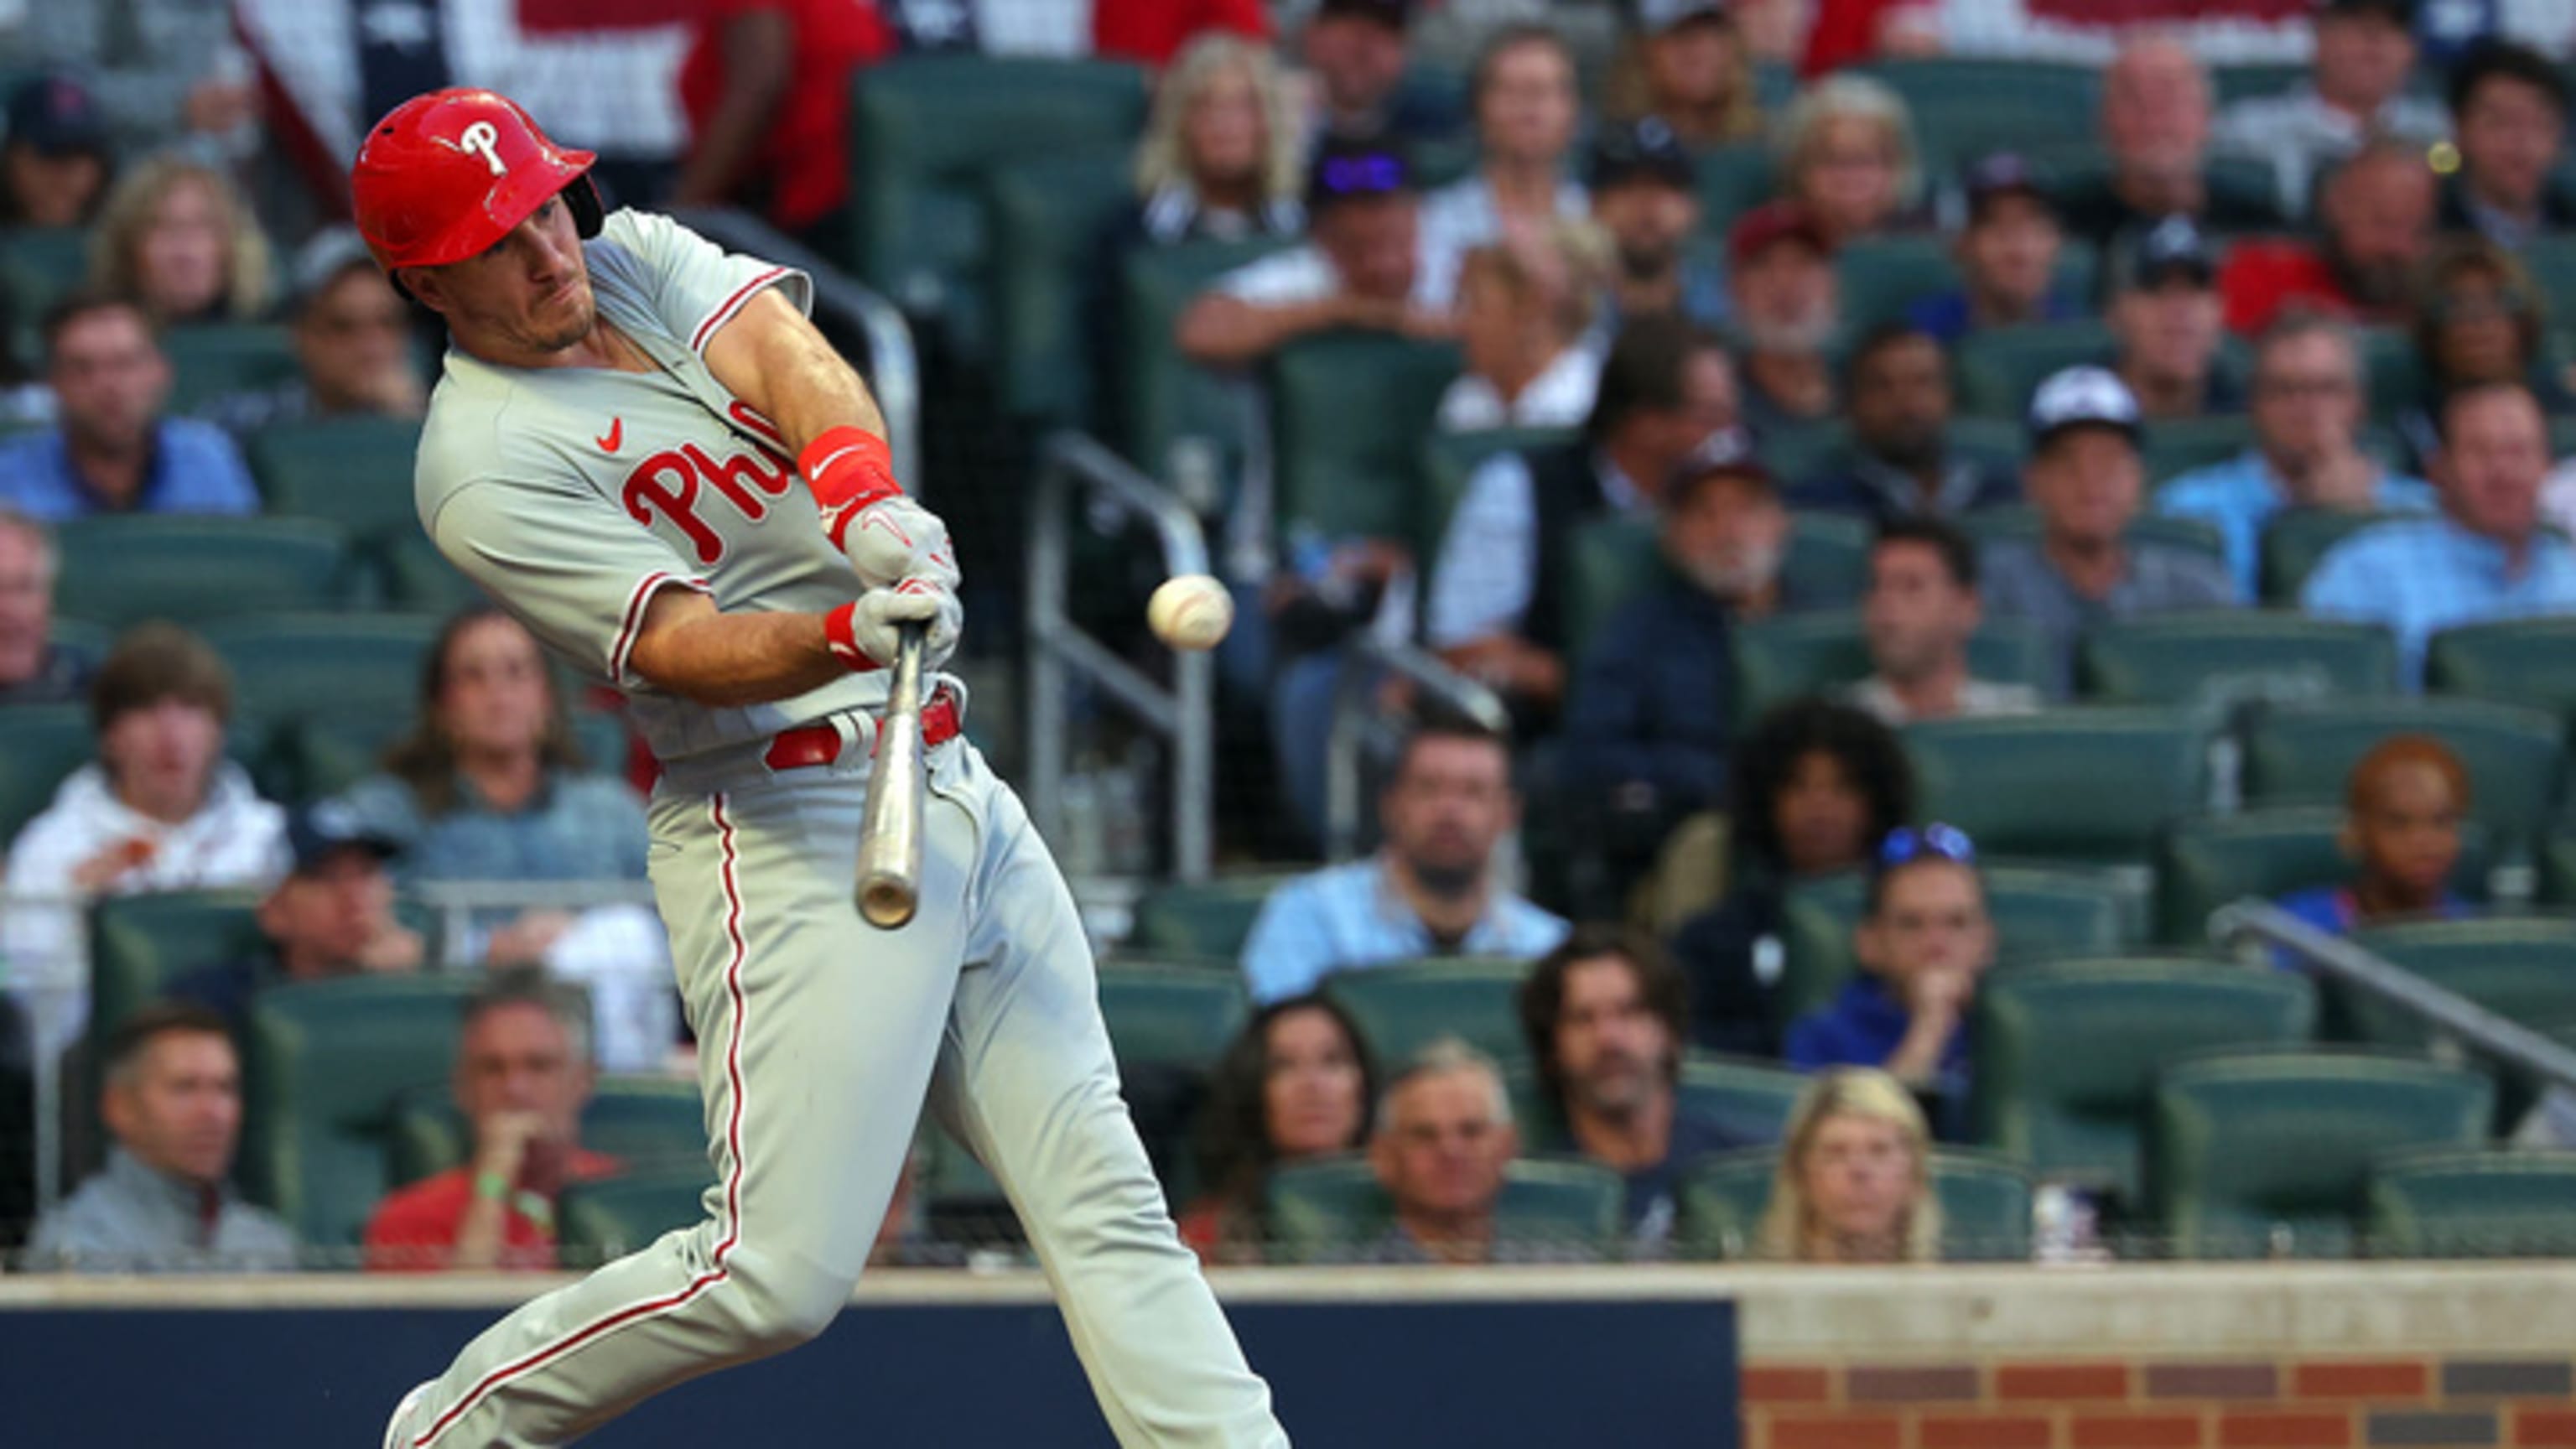 Phillies vs. Braves NLDS Game 2 starting lineups and pitching matchup